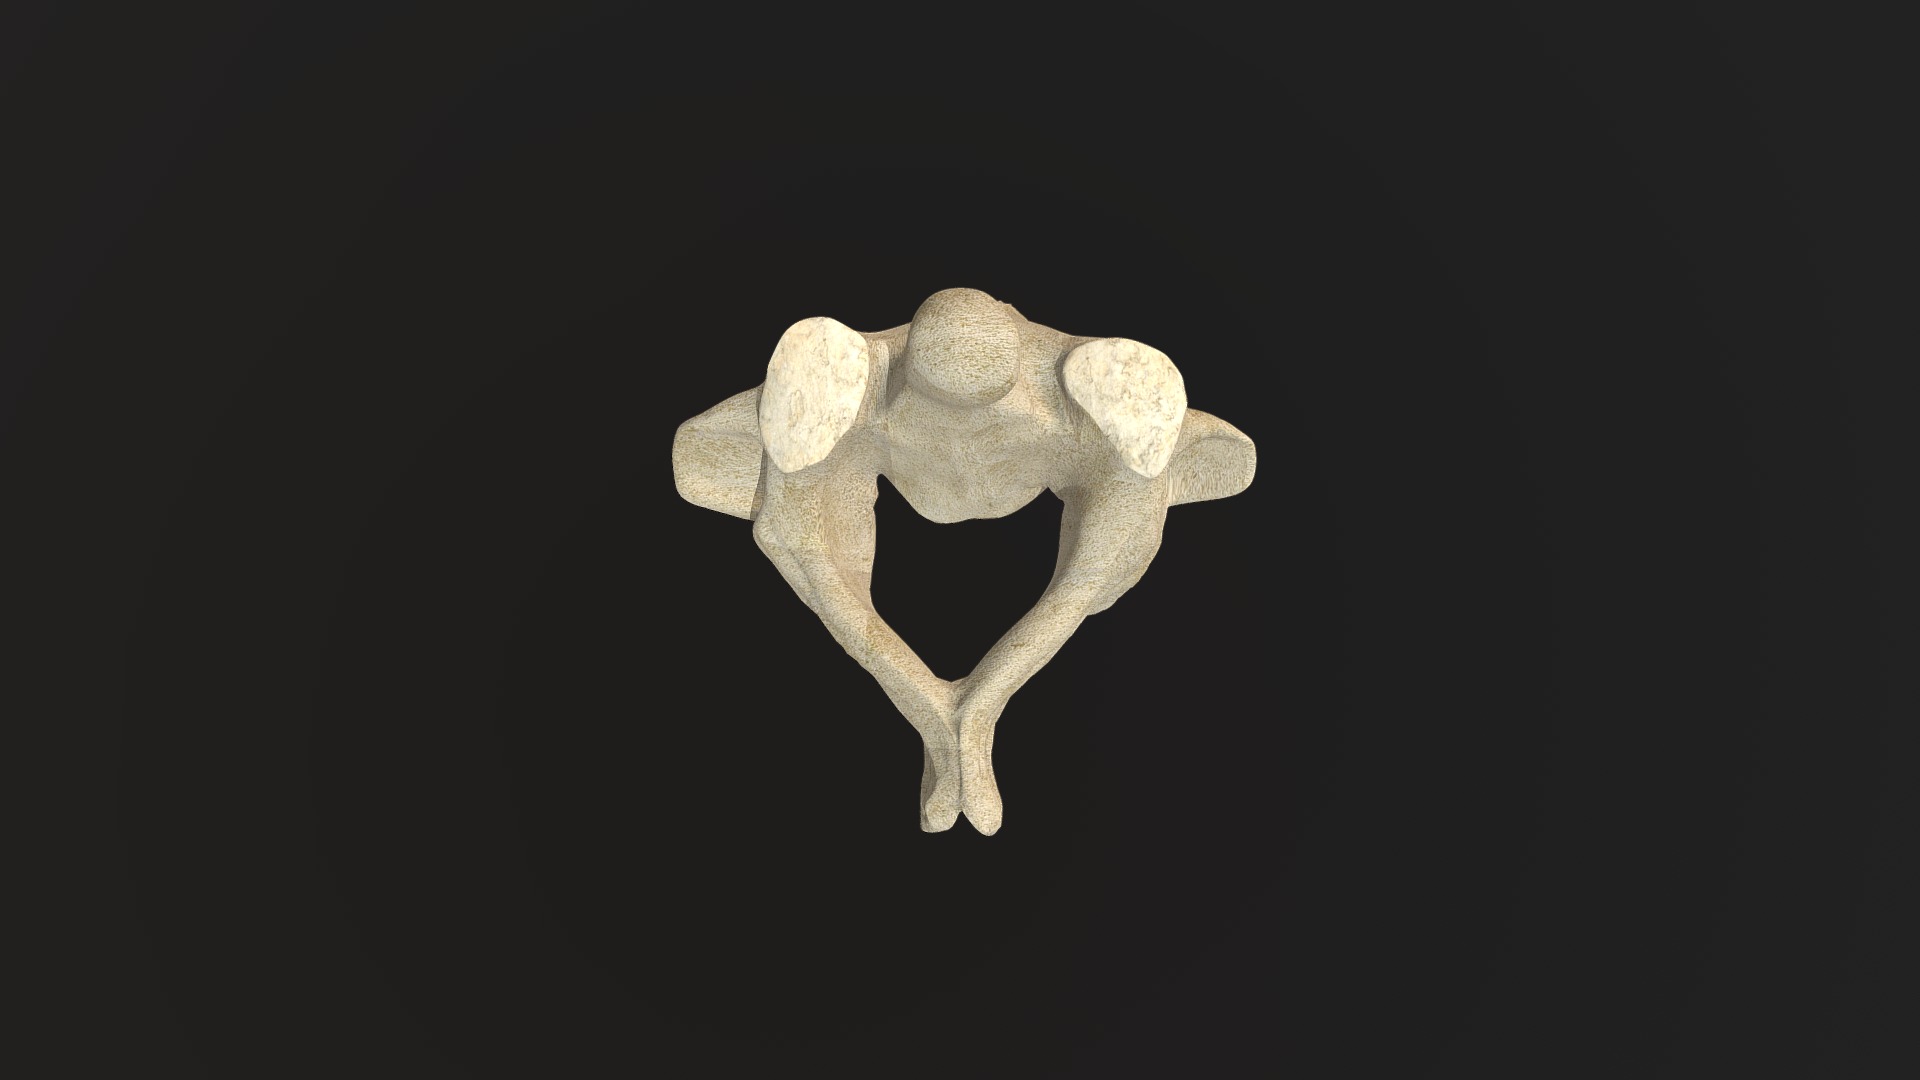 3D model Vertebra Axis / Axis Vertebrae (C2) - This is a 3D model of the Vertebra Axis / Axis Vertebrae (C2). The 3D model is about a skull with a black background.